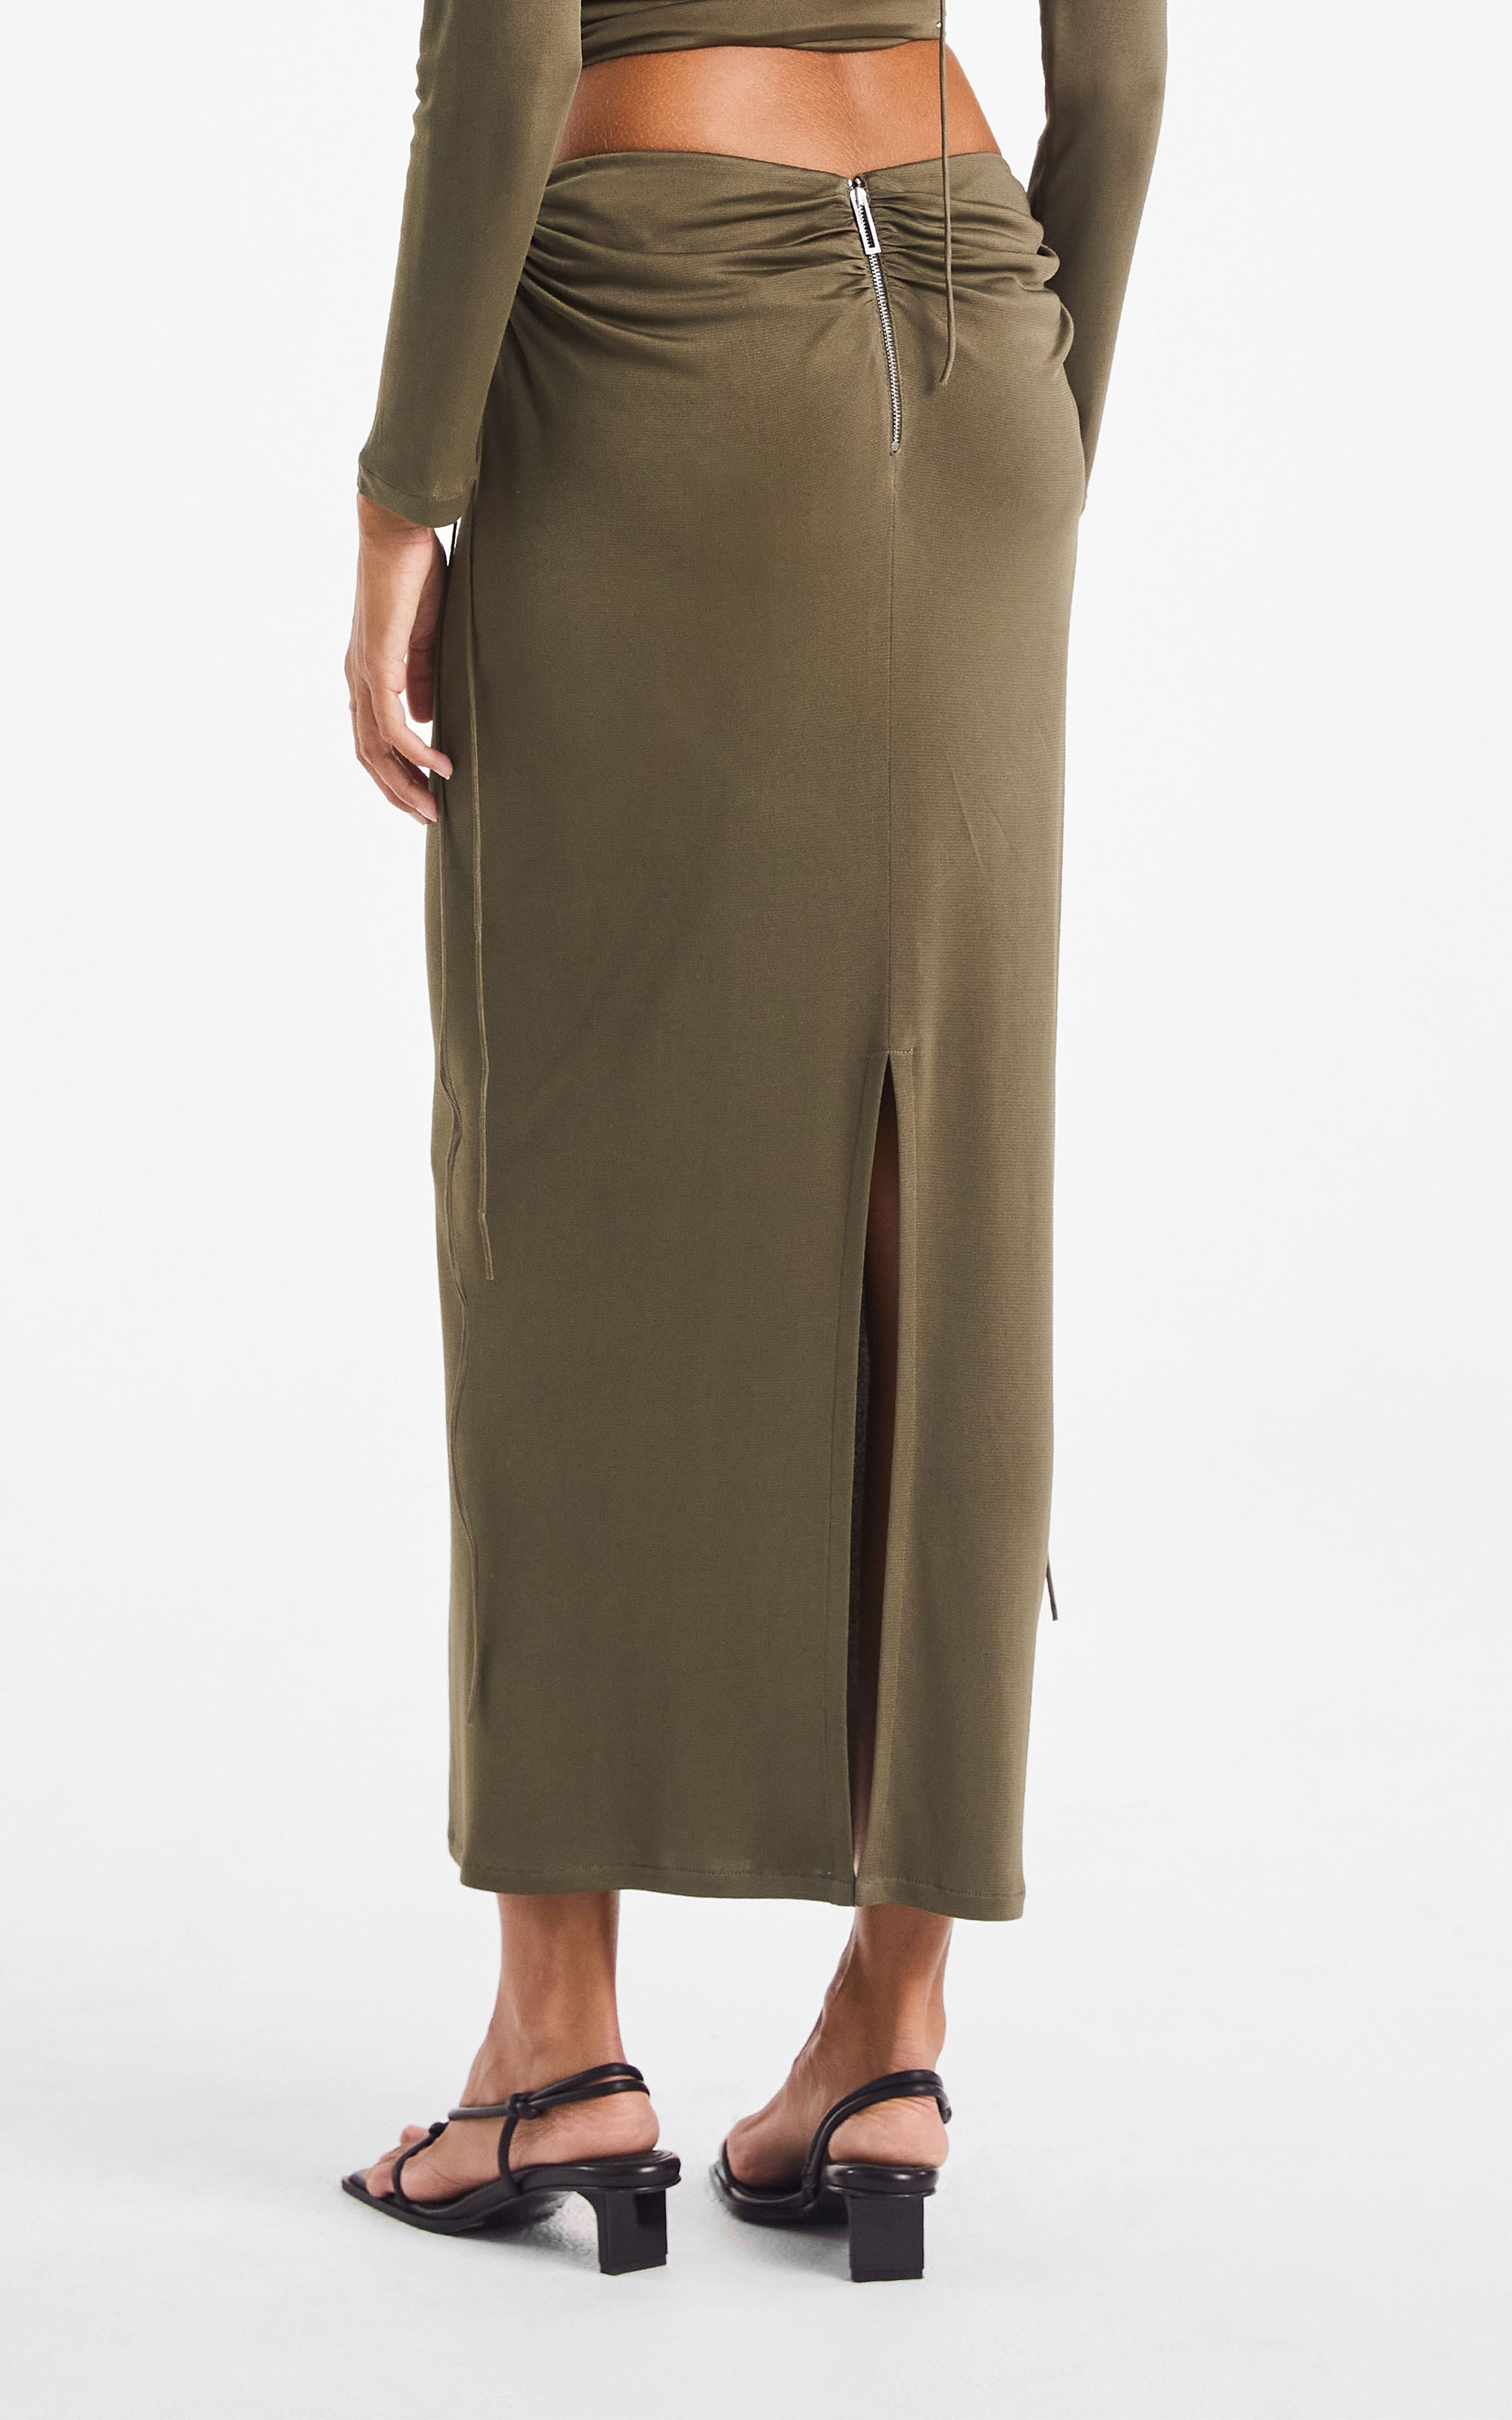 WIRE JERSEY SKIRT by Dion Lee